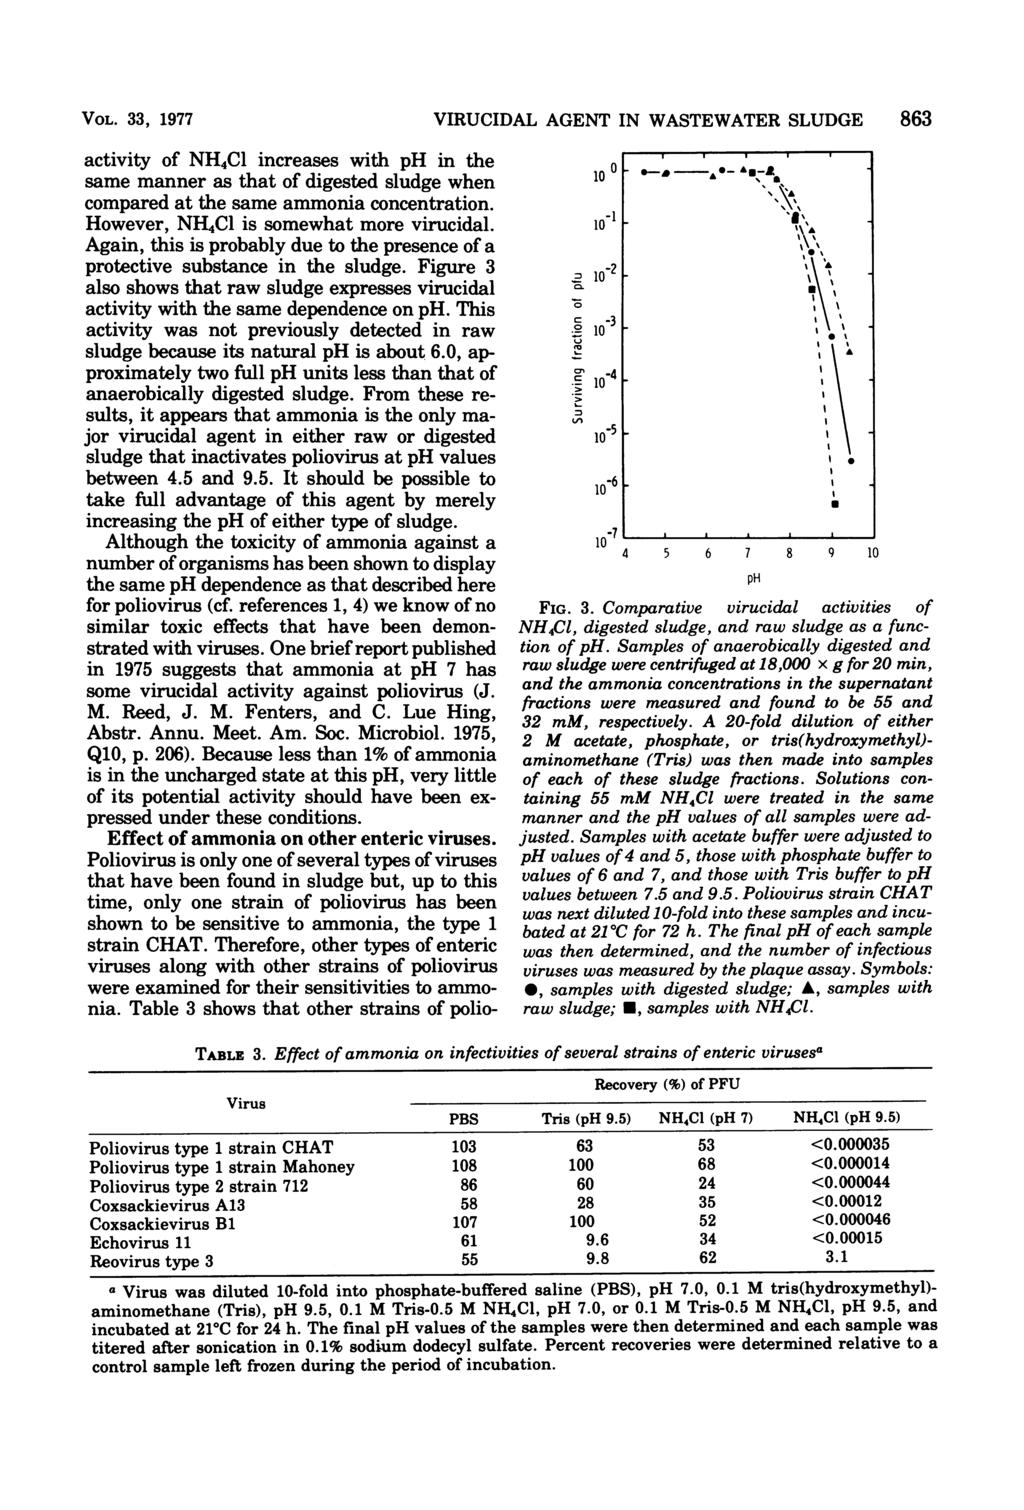 VOL. 33, 1977 VIRUCIDAL AGENT IN WASTEWATER SLUDGE 863 activity of NH4Cl increases with ph in the same manner as that of digested sludge when compared at the same ammonia concentration.